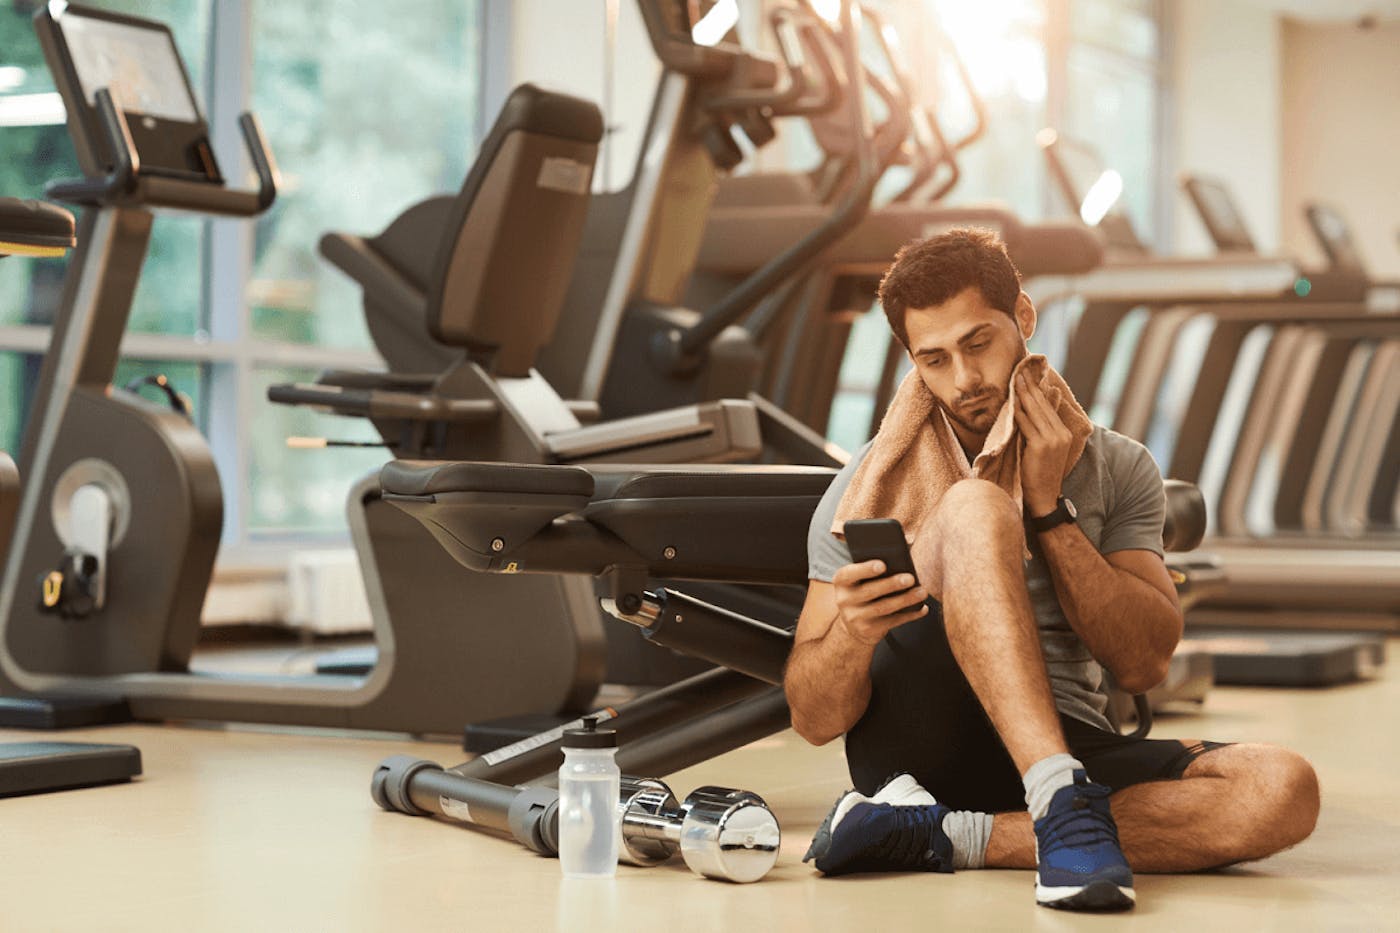 ScreenCloud Article - 7 Ways to Motivate Your Gym Members Based on Science